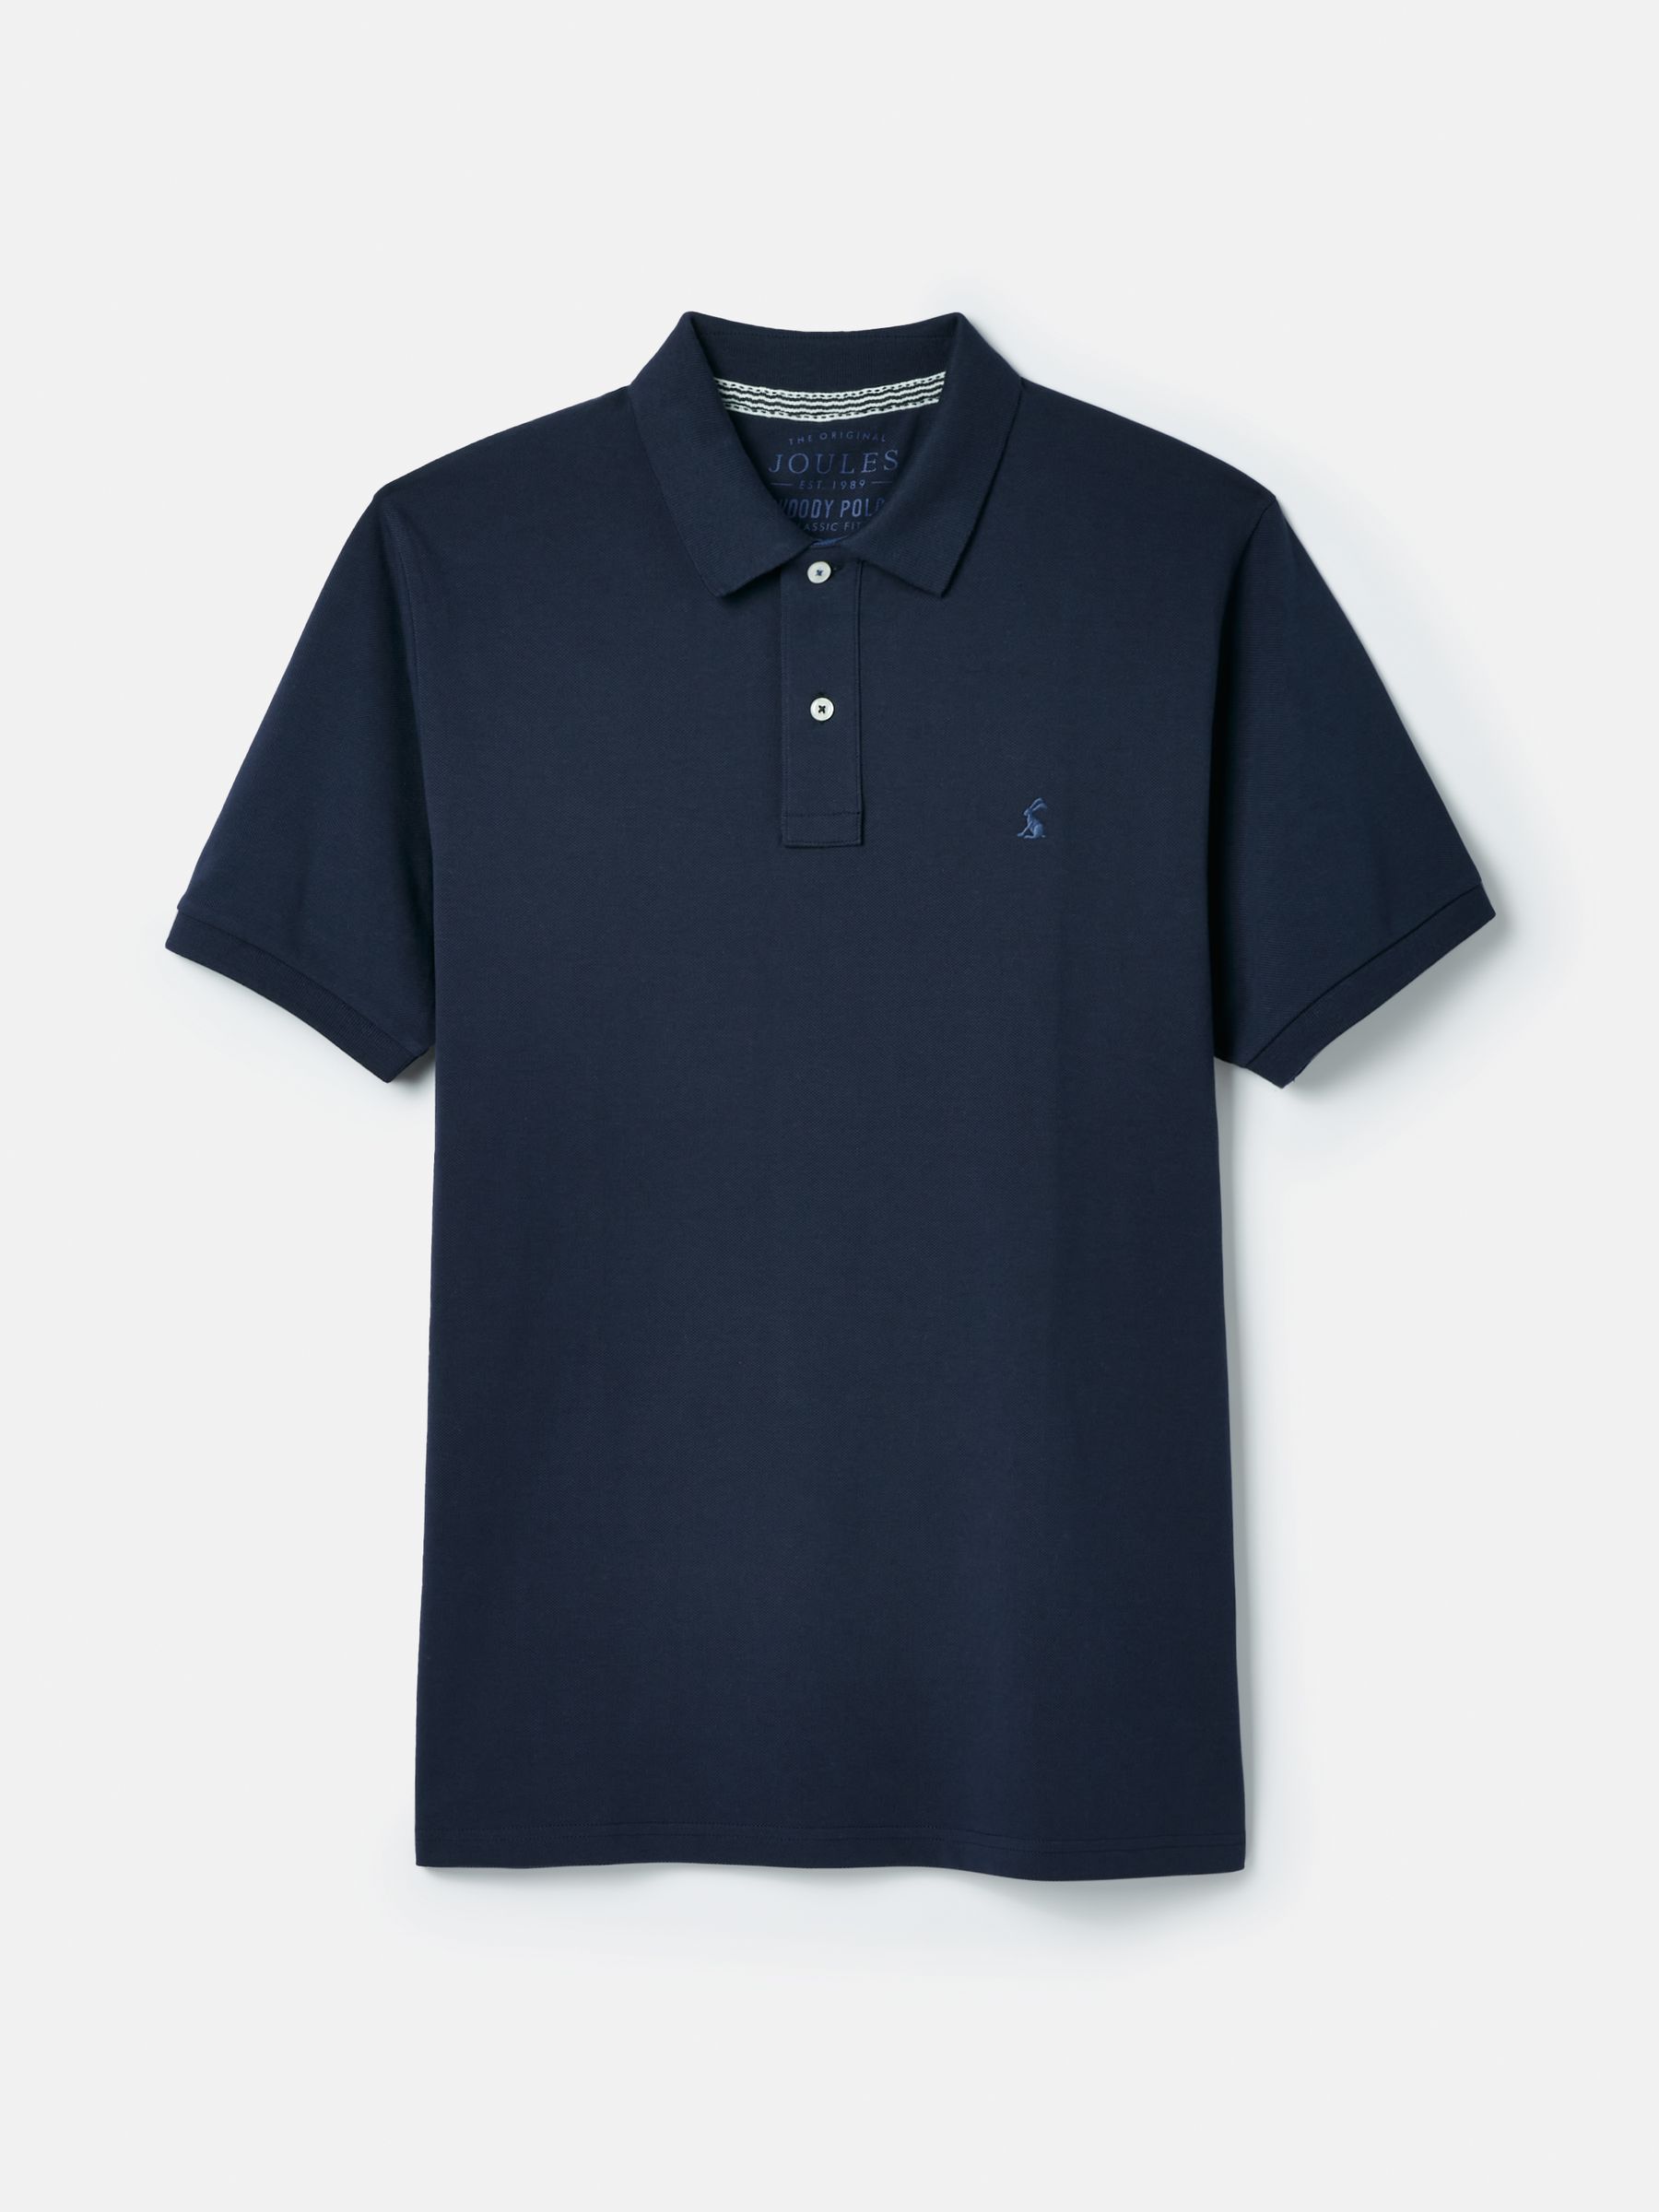 Buy Woody Navy Regular Fit Cotton Polo Shirt from the Joules online shop